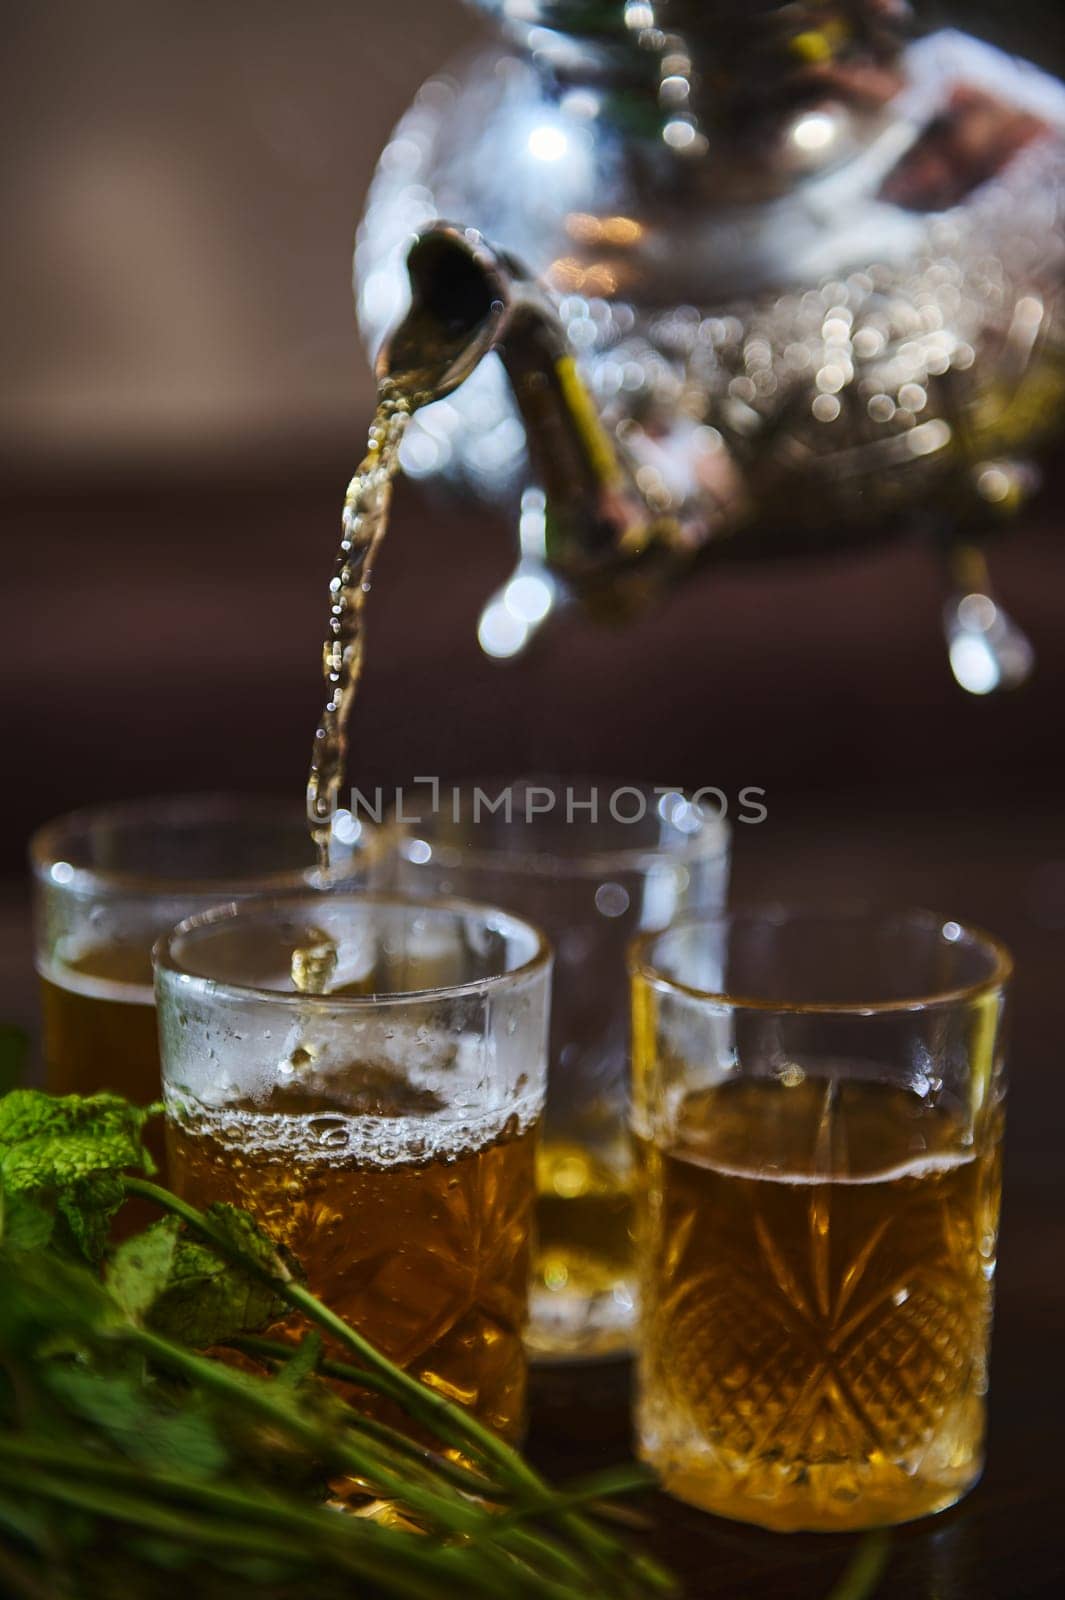 Close-up of pouring delicious Moroccan mint tea from a silver teapot into drinking glasses. Bunch of fresh mint in the foreground. Tea break in Morocco